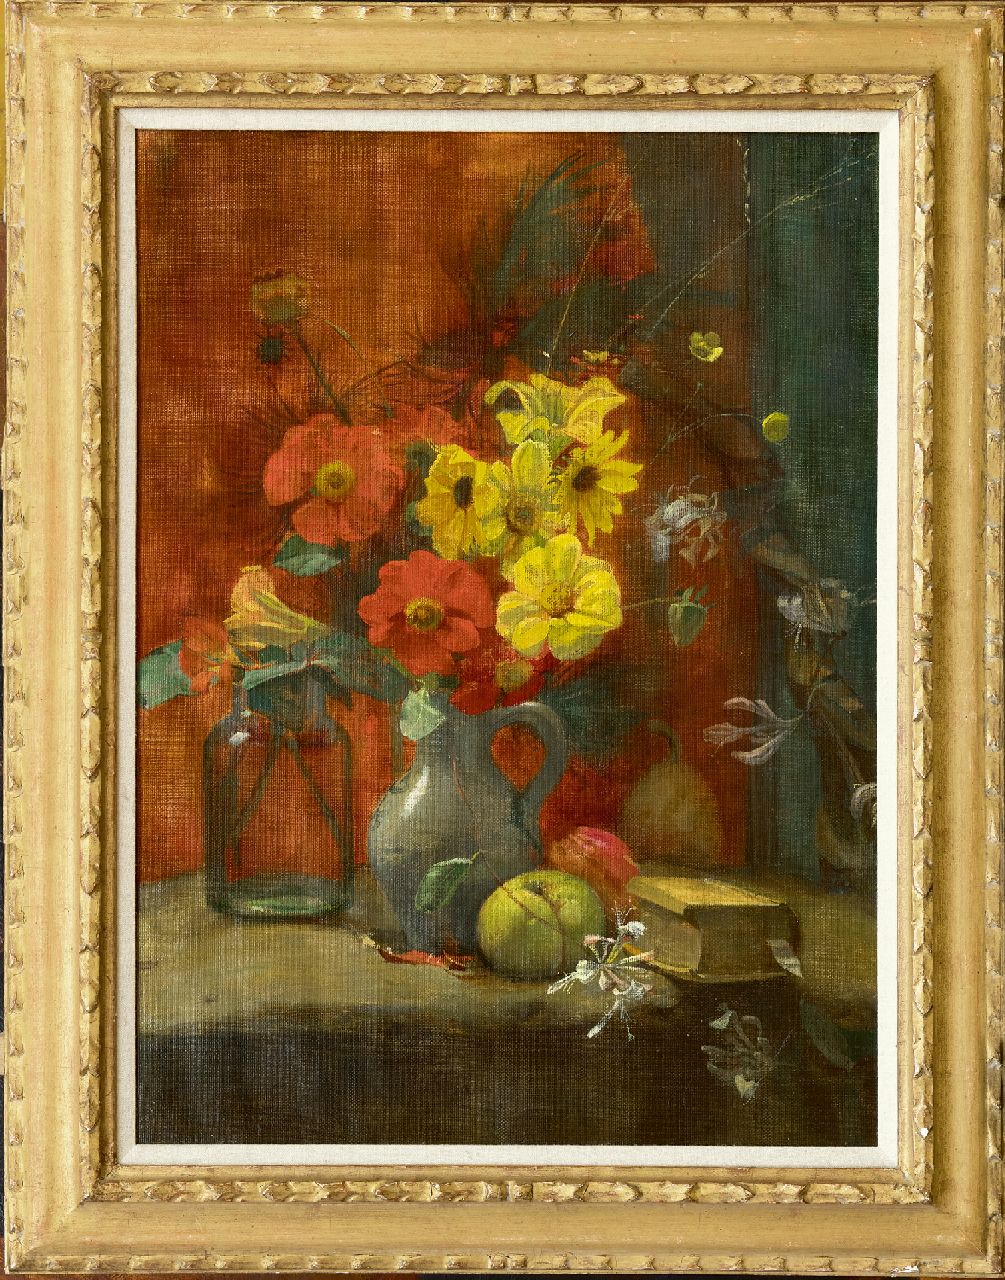 Meiners P.  | Pieter 'Piet' Meiners, Ewijckshoeve: flower still life, oil on canvas 64.3 x 47.3 cm, signed l.l. and dated '97